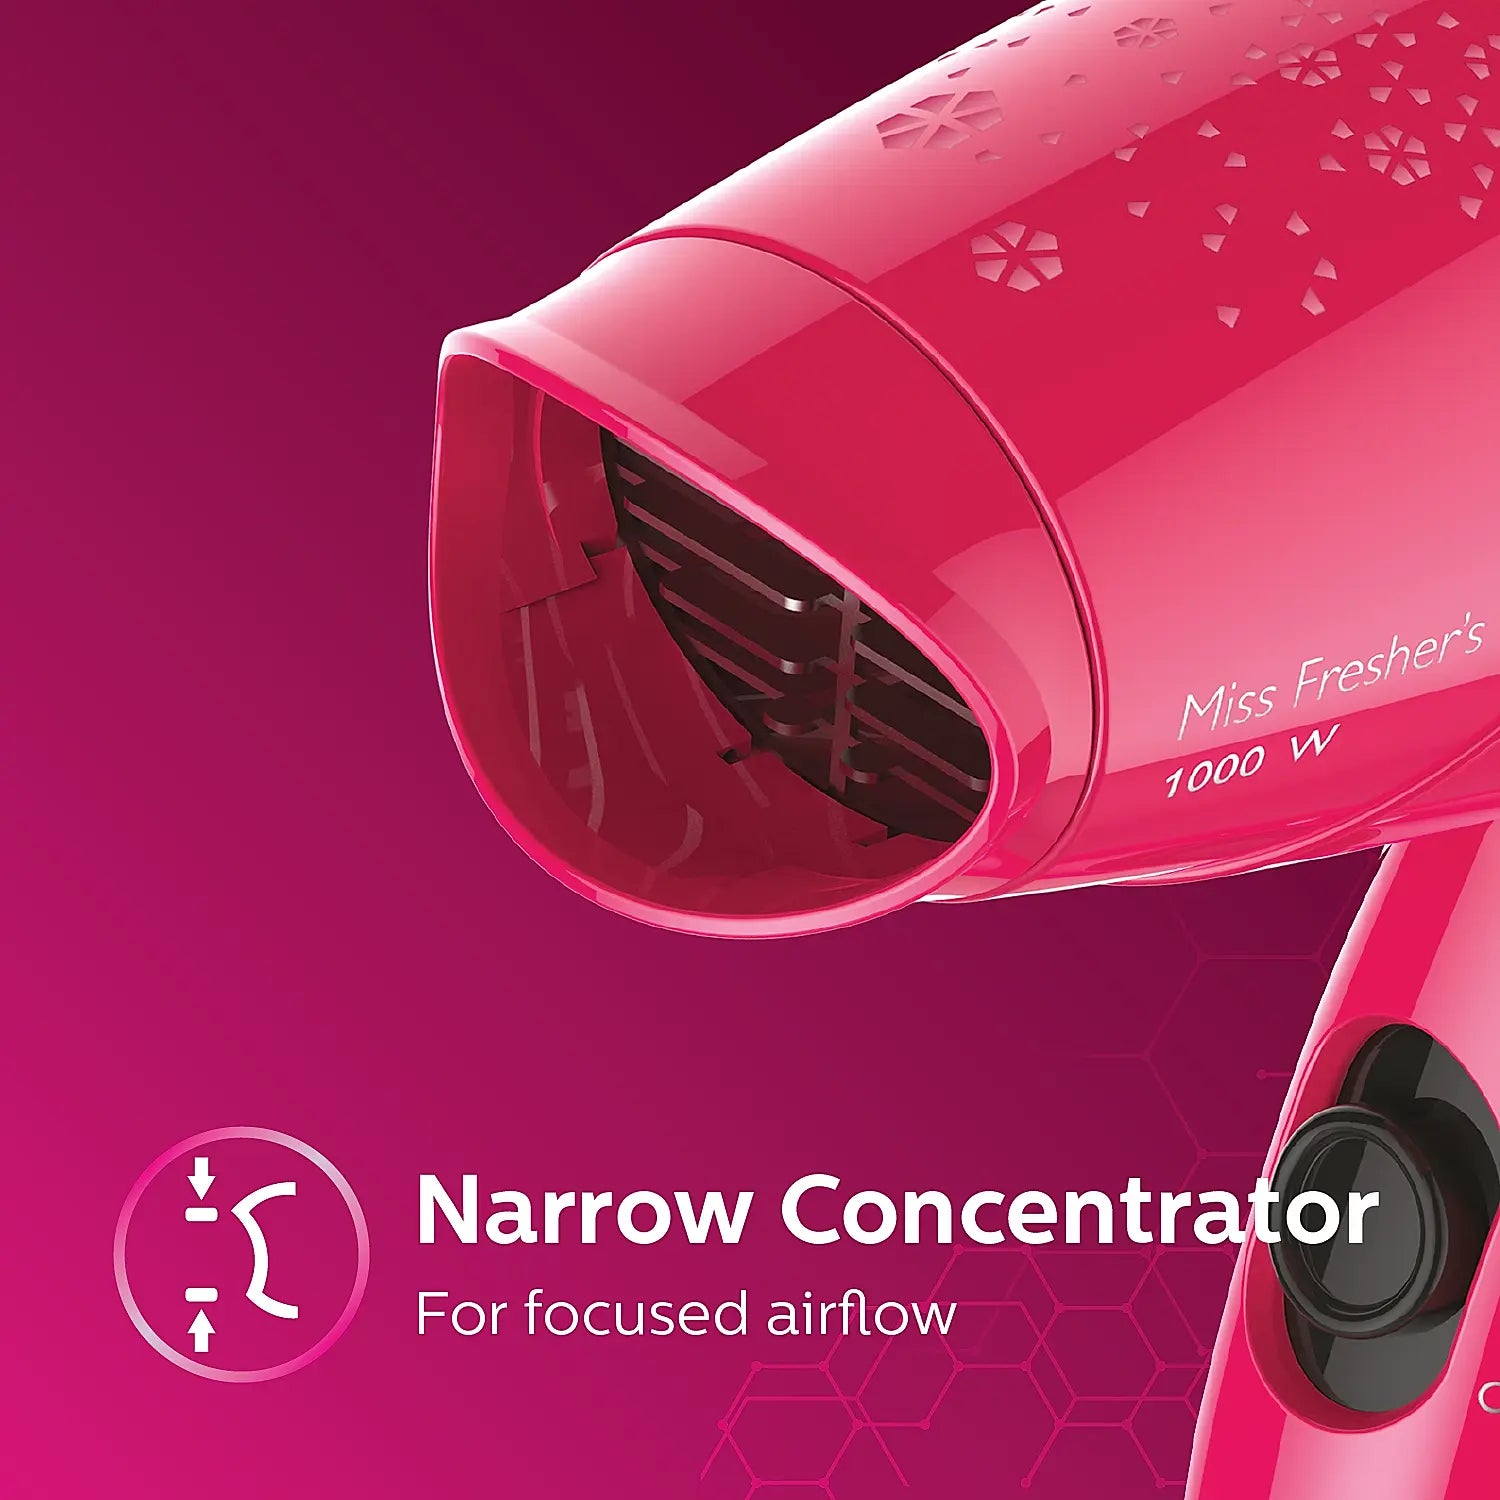 Philips Styling Kit | Hair Straightener and Dryer Combo | Silkprotect Technology | 1000W Hair Dryer| HP8643/46